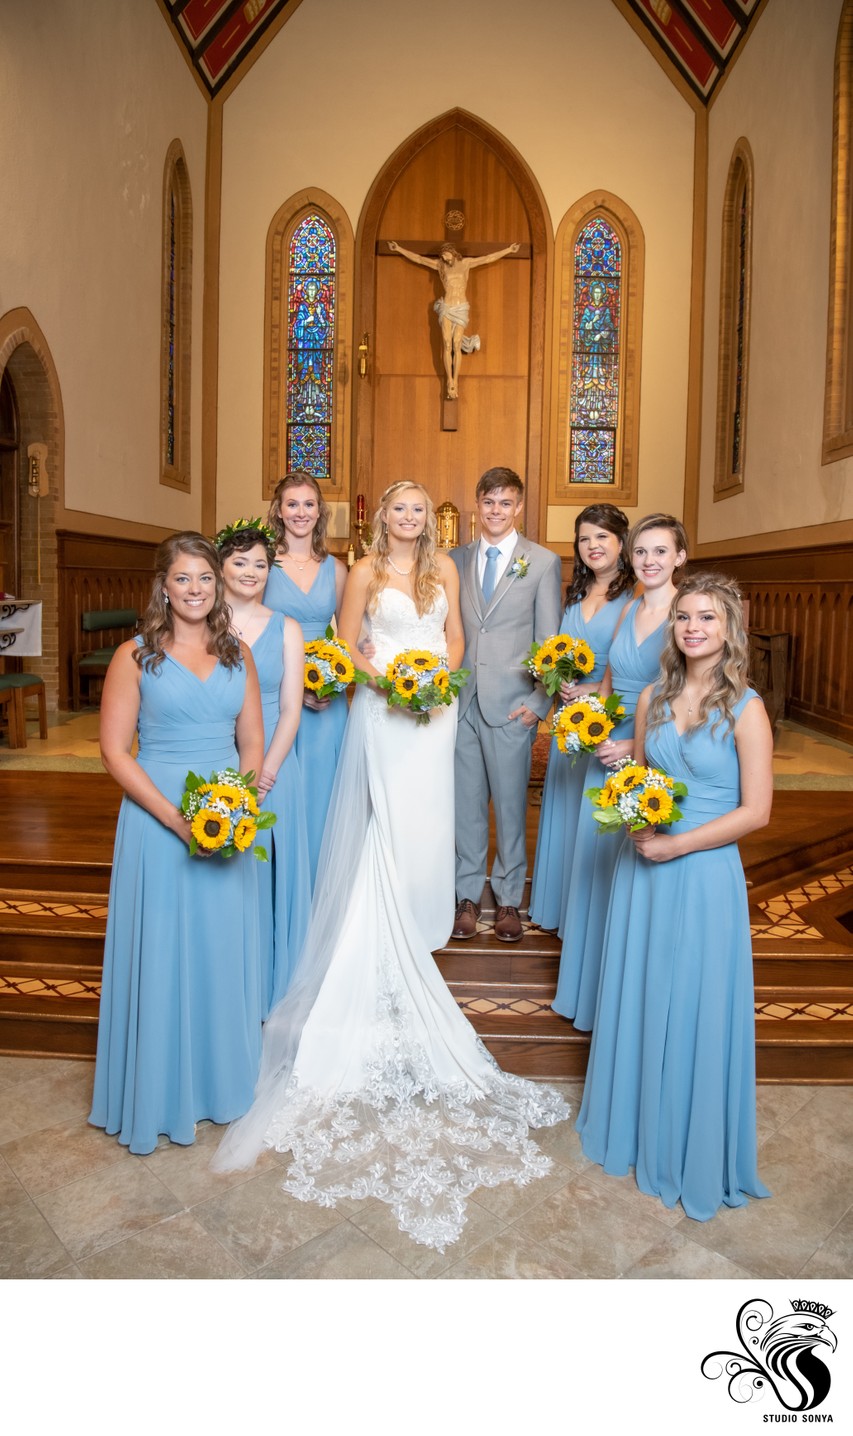 Couple and bridesmaids in front of altar